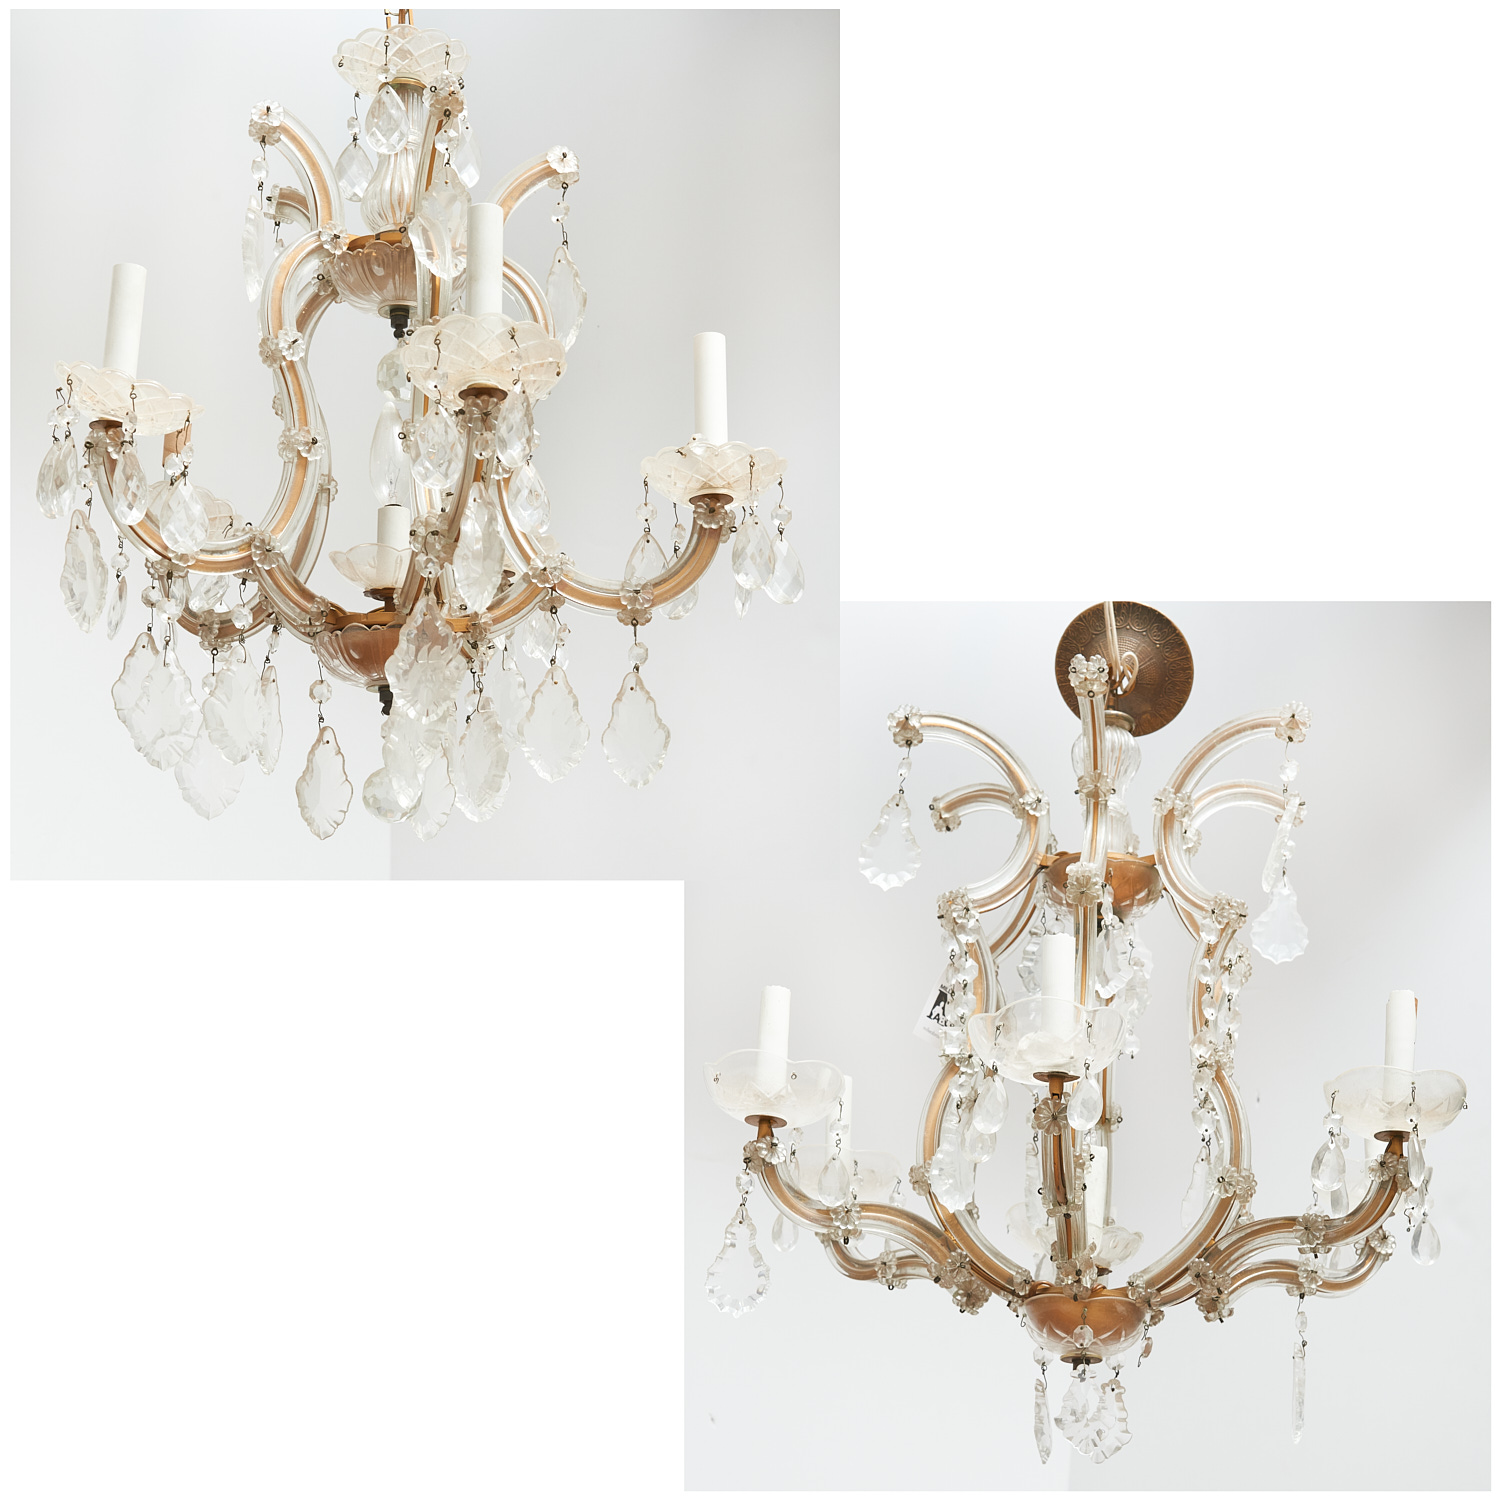 NEAR PAIR MARIA THERESA STYLE CHANDELIERS 3621d5